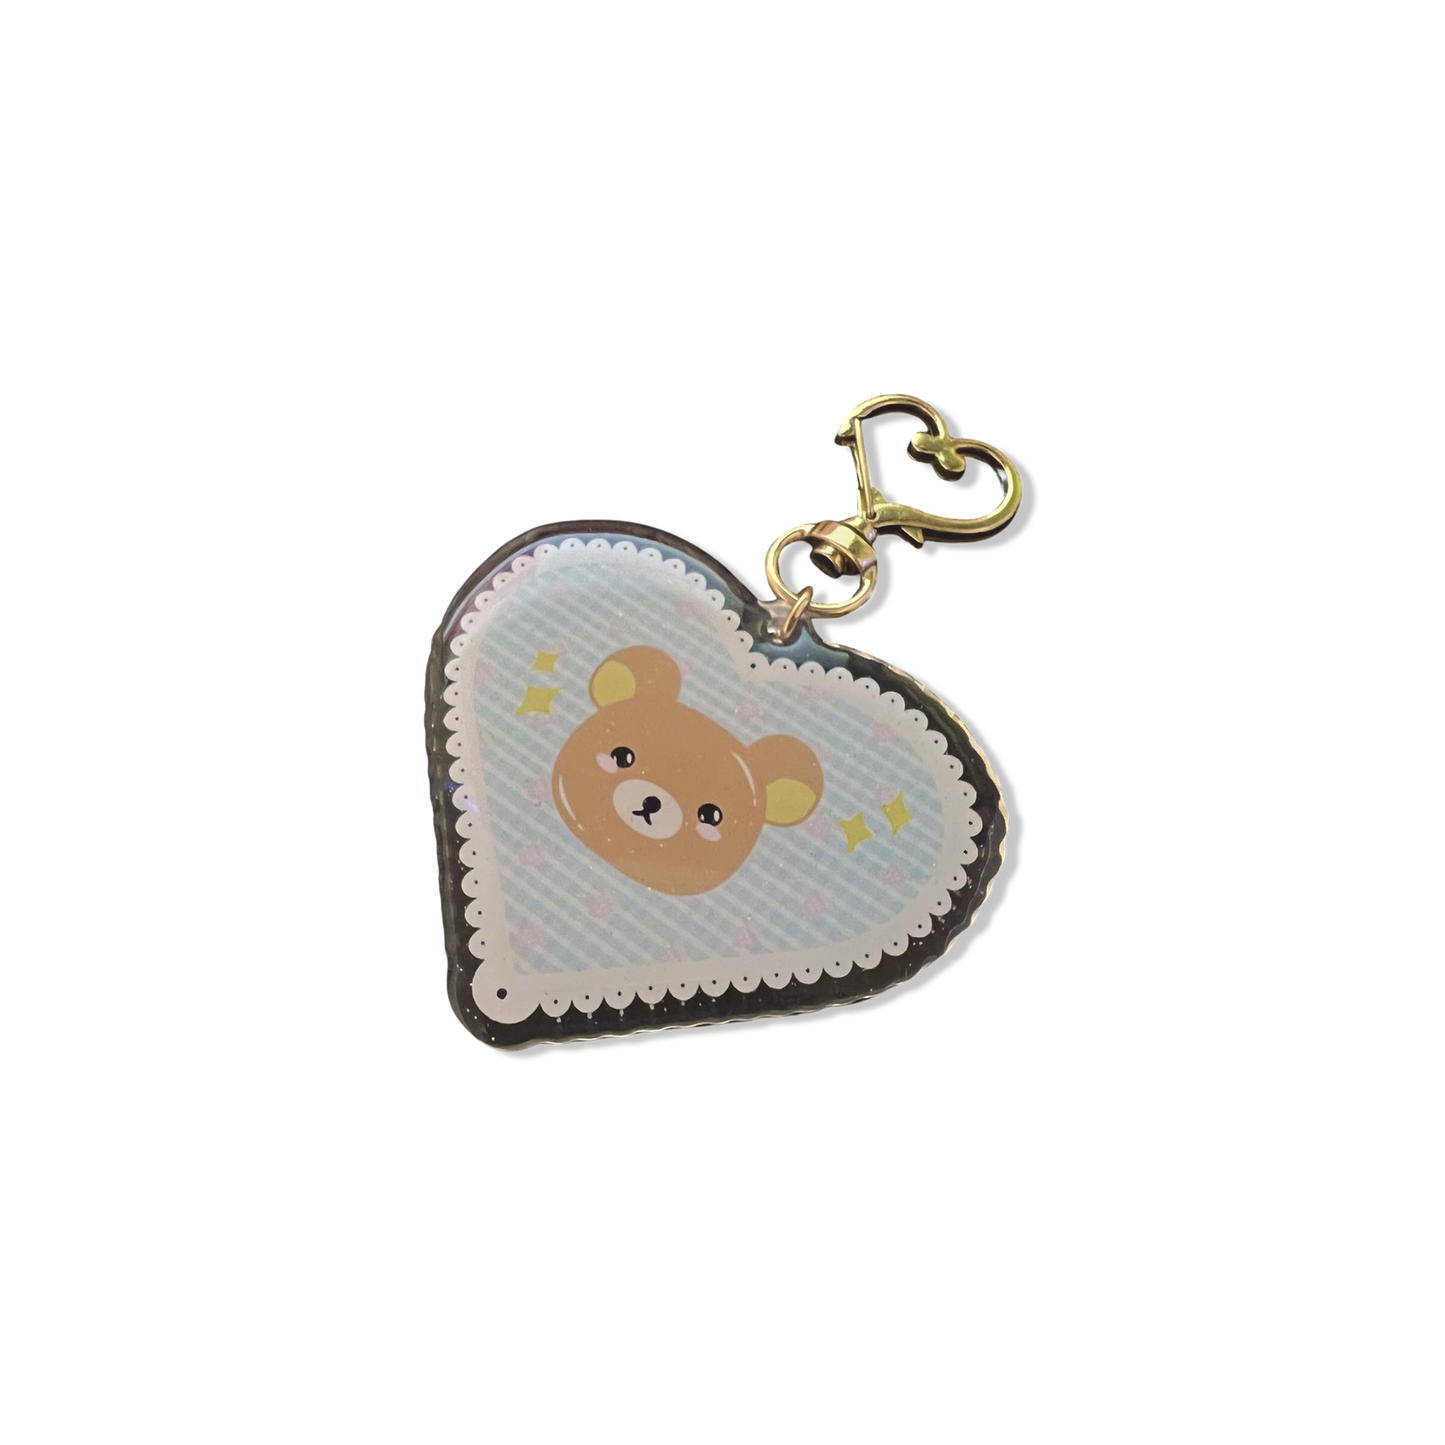 Brown bear acrylic keychain with micro-glitter finish and gold heart hook.